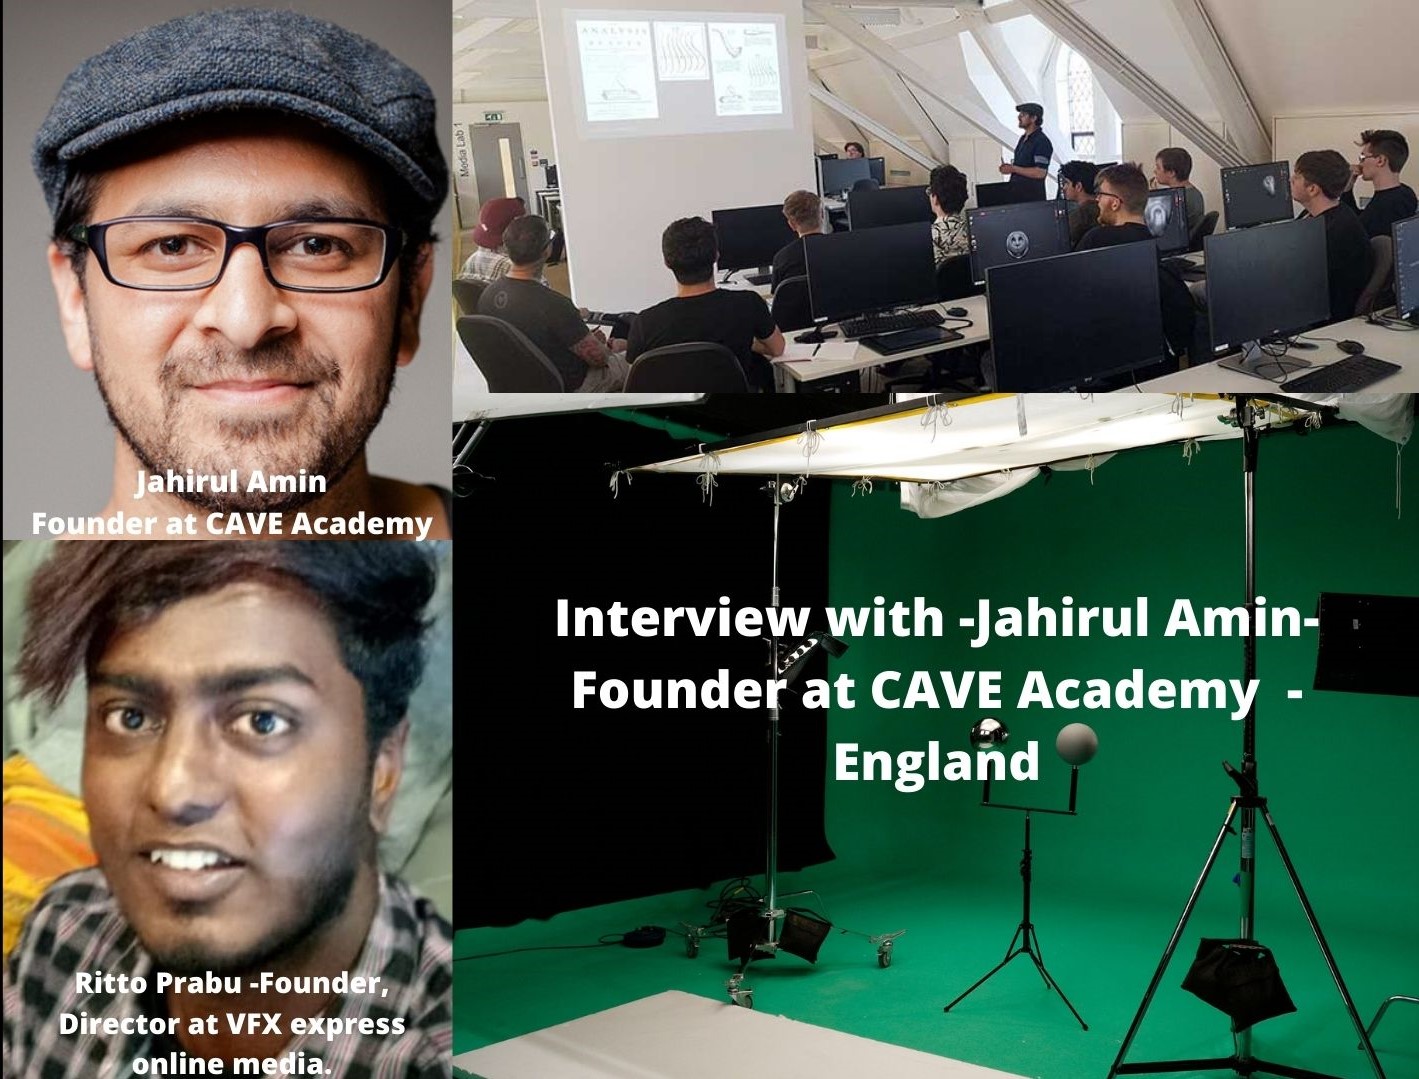 Interview with -Jahirul Amin- Founder at CAVE Academy